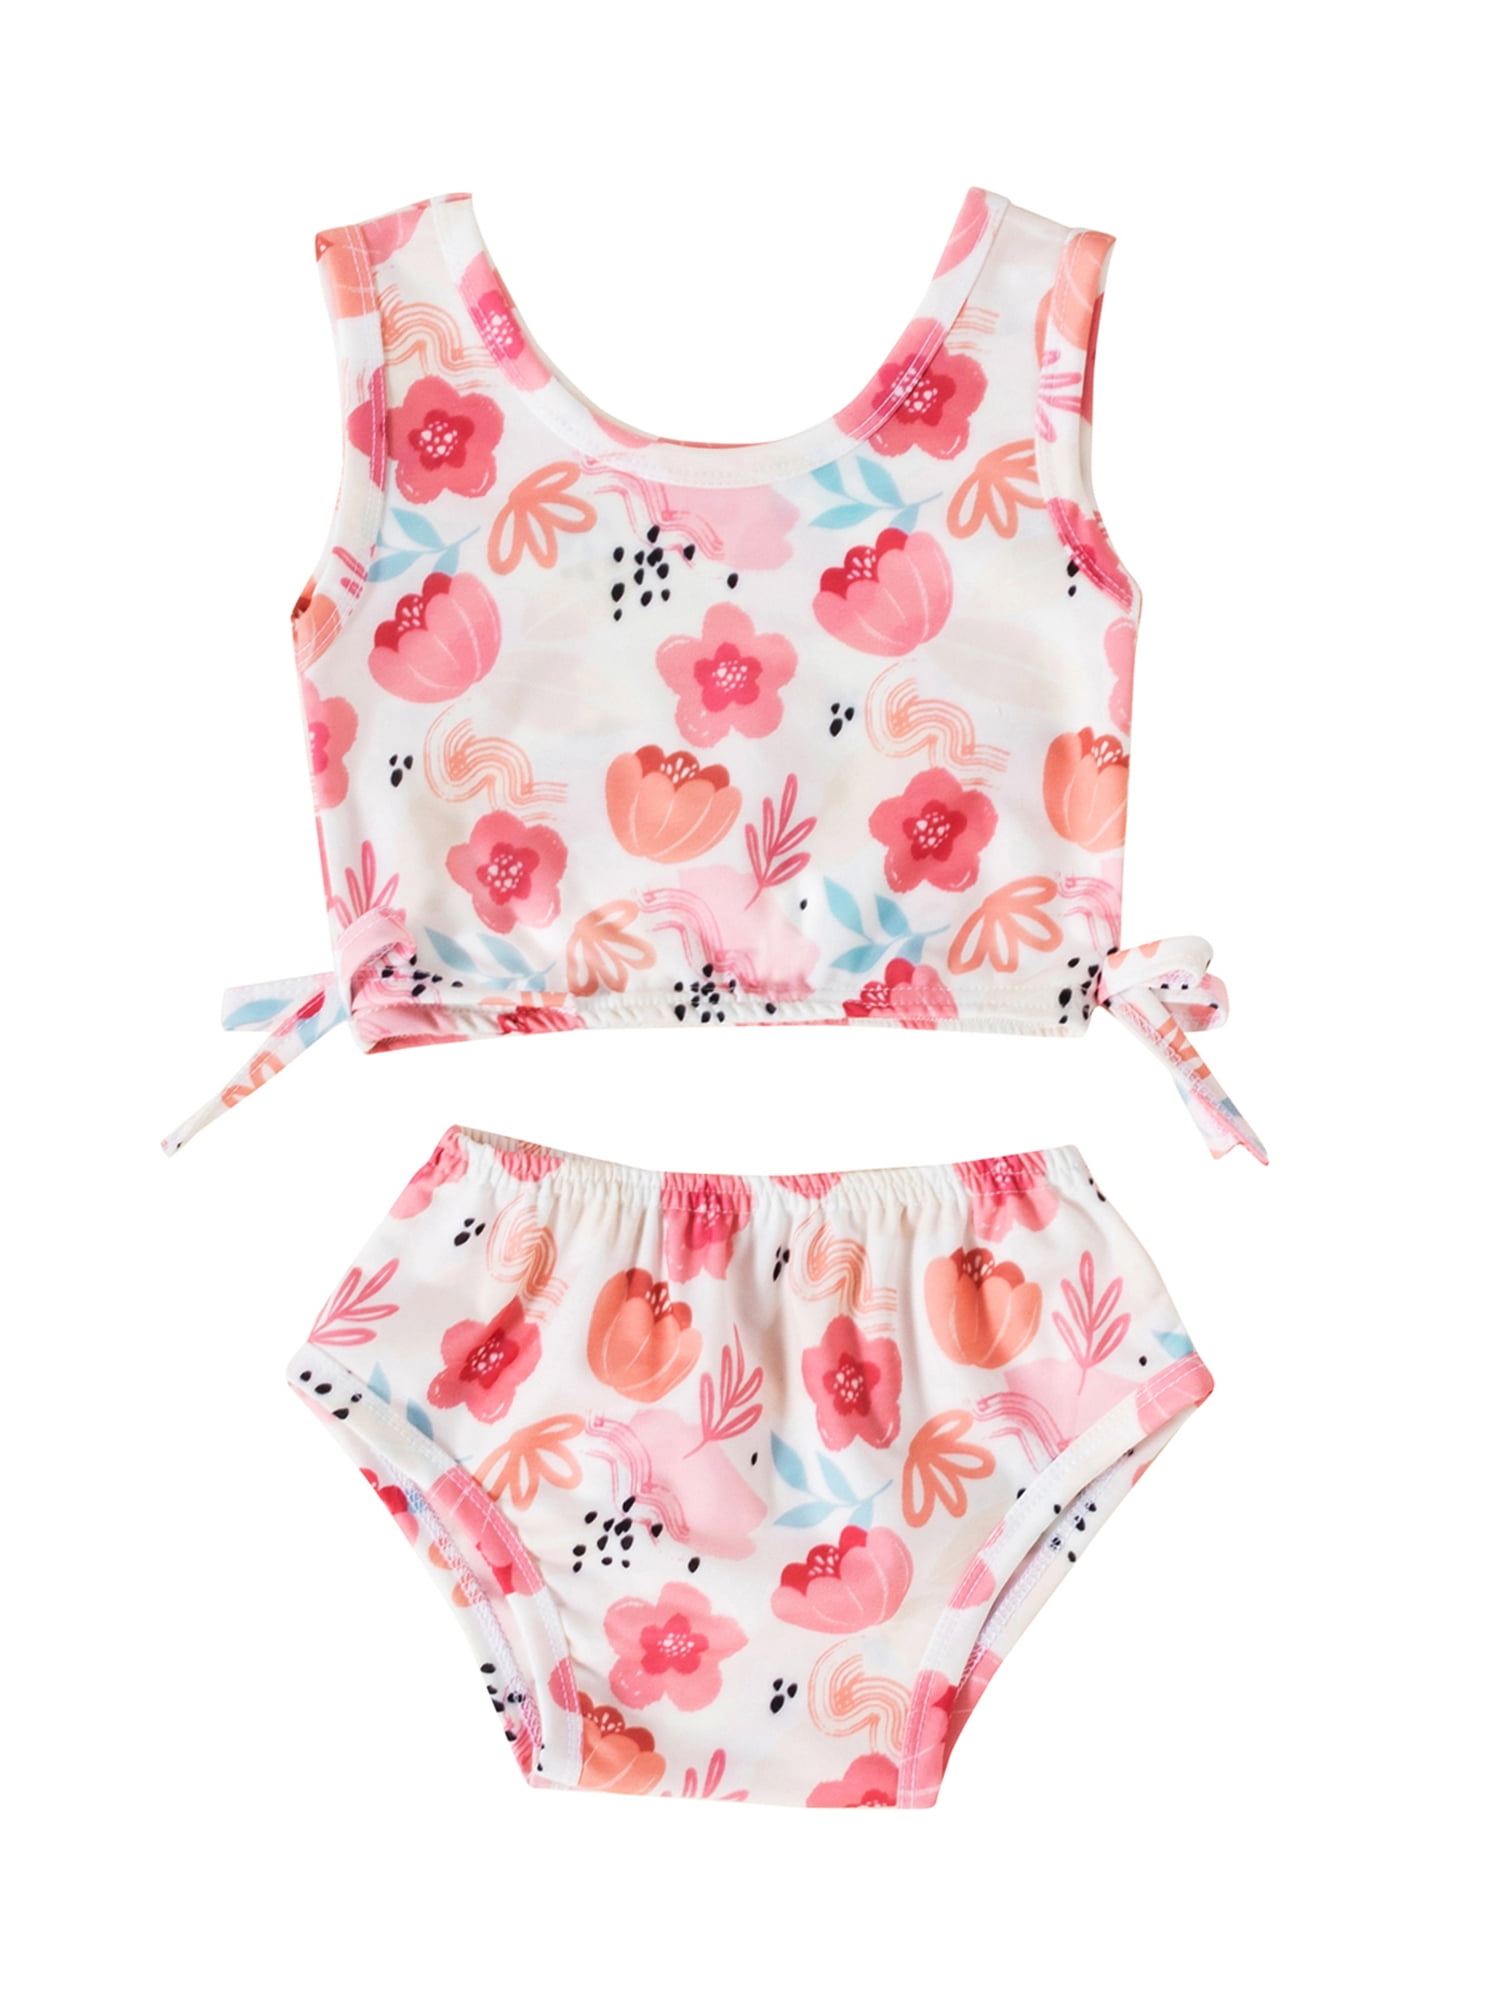 White Bathing Suit with Red Ruffles for Infant Girls and Kids 